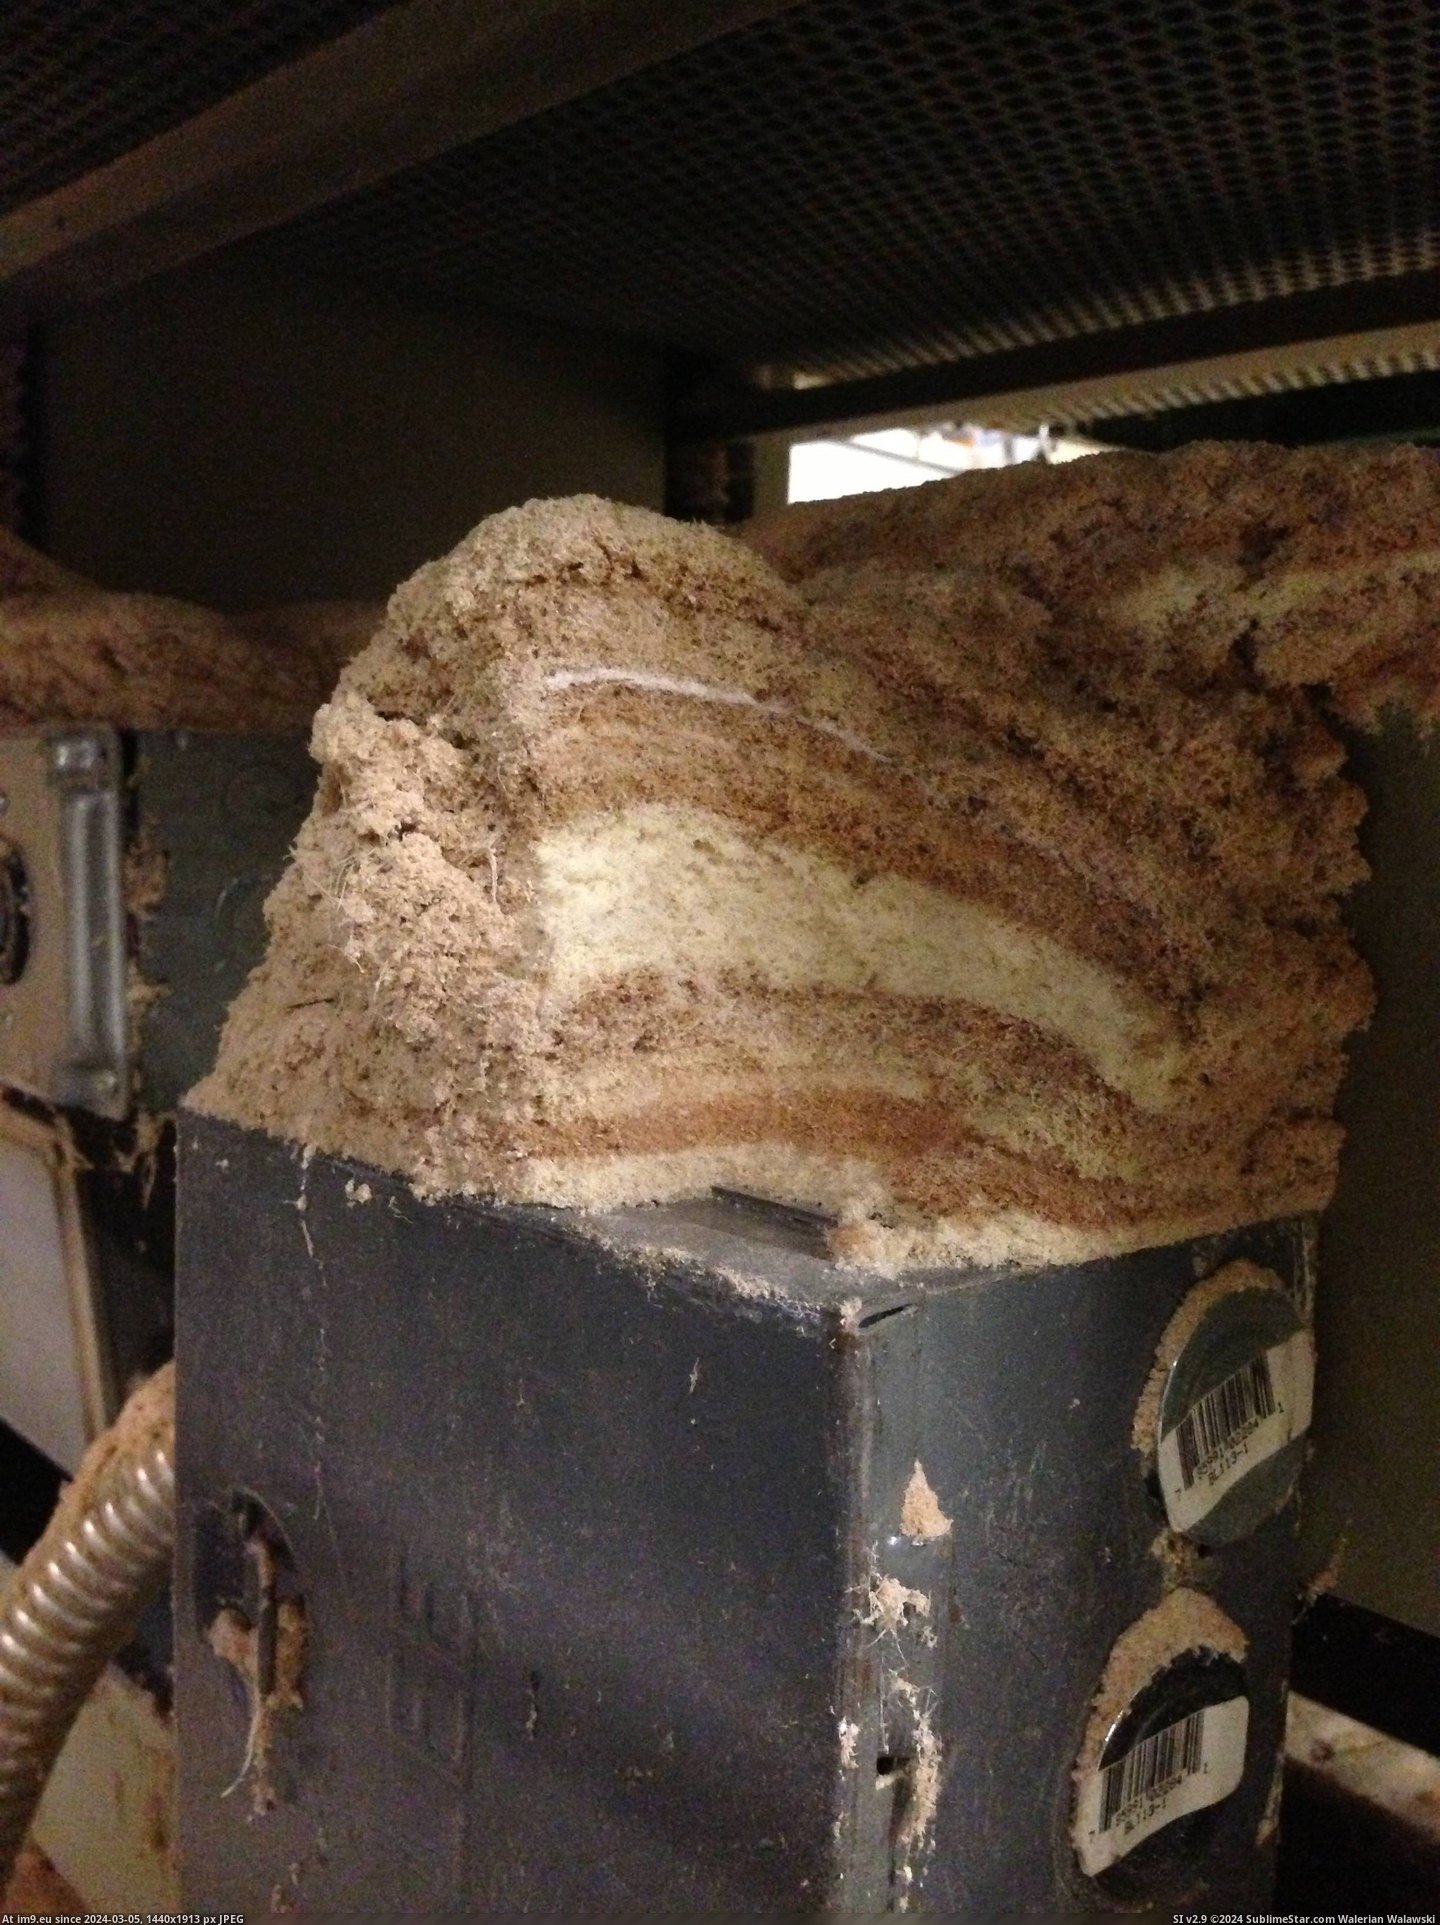 #Years #Collected #Machine #Sawdust #Millwor #Cabinet #Layered #Grandfathers [Mildlyinteresting] I came across many layered years of collected sawdust inside of a machine at my grandfathers cabinet-millwor Pic. (Изображение из альбом My r/MILDLYINTERESTING favs))